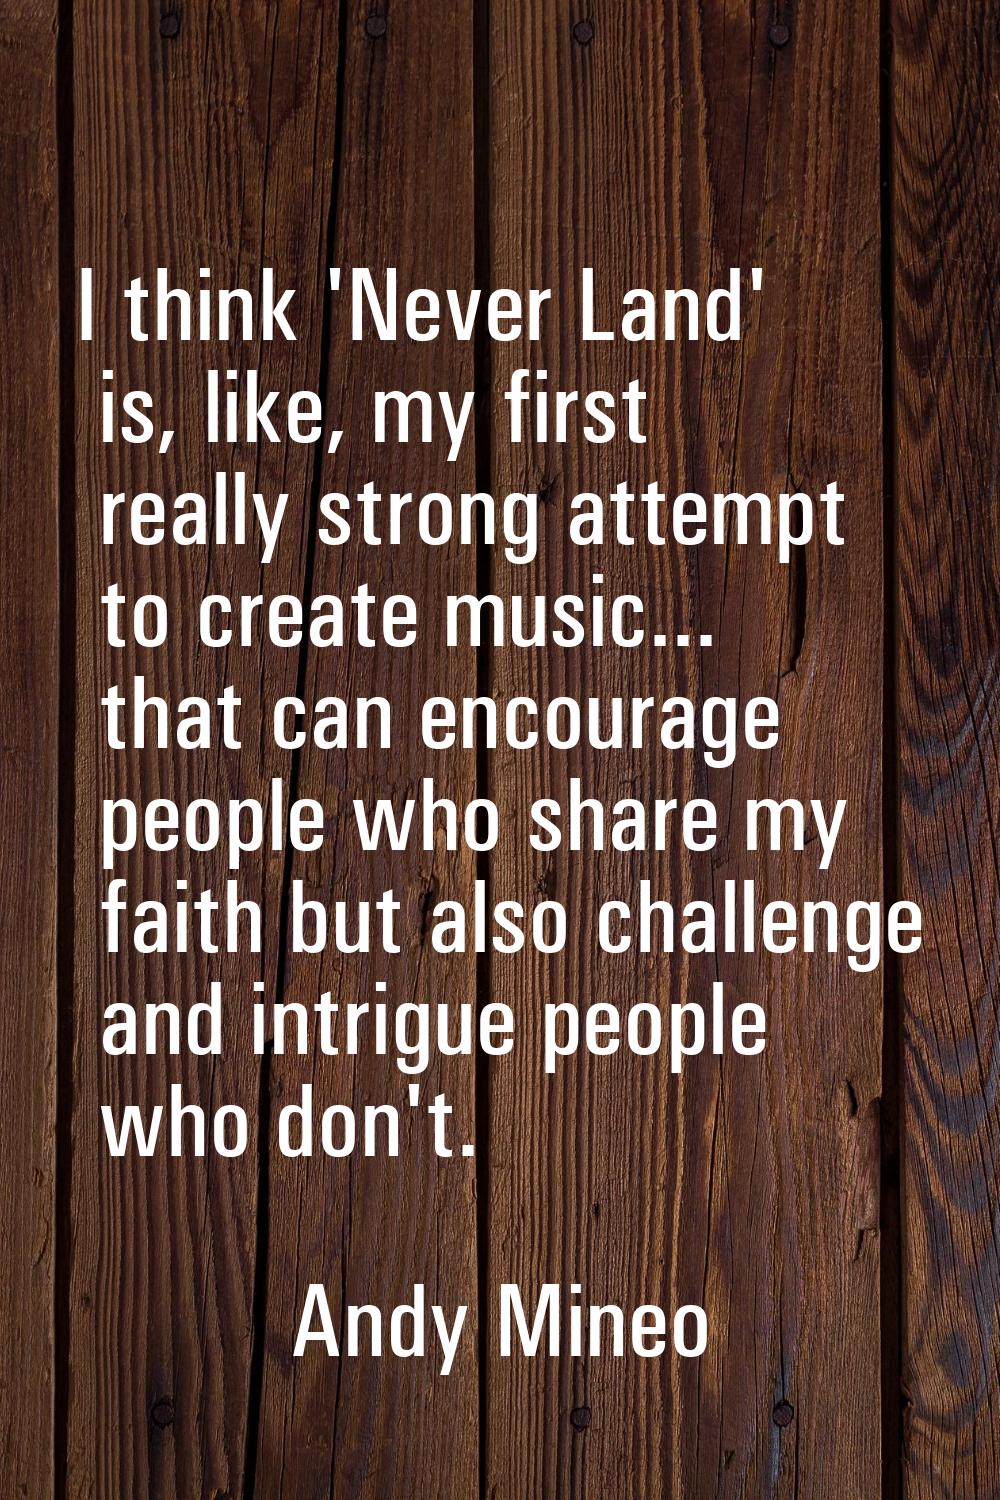 I think 'Never Land' is, like, my first really strong attempt to create music... that can encourage